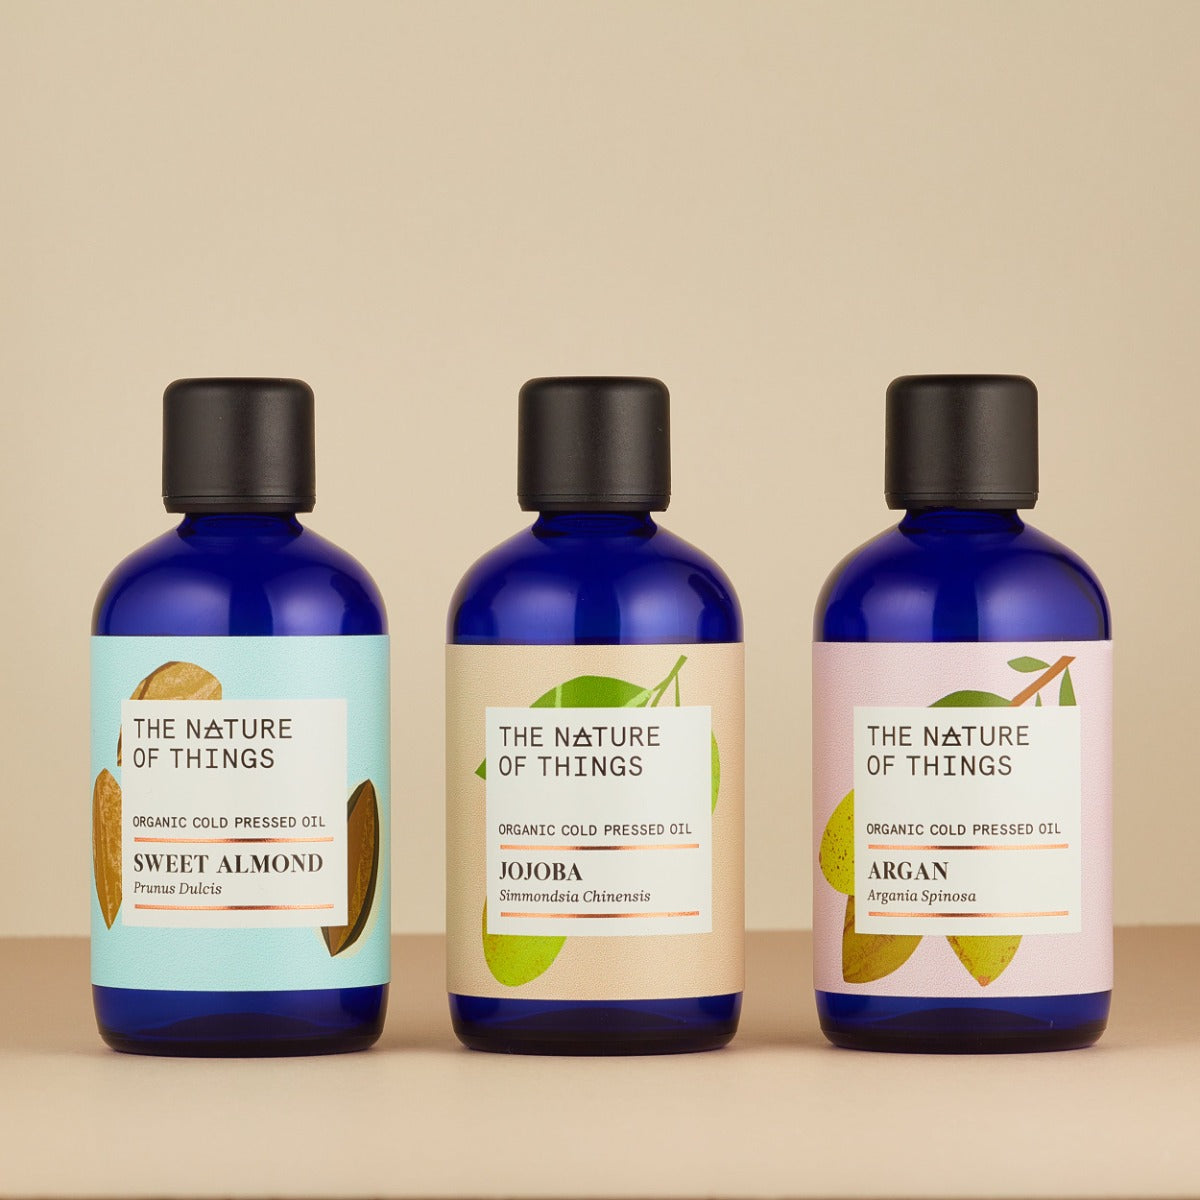 Organic Almond, Argan and Jojoba Oils from The Nature of Things